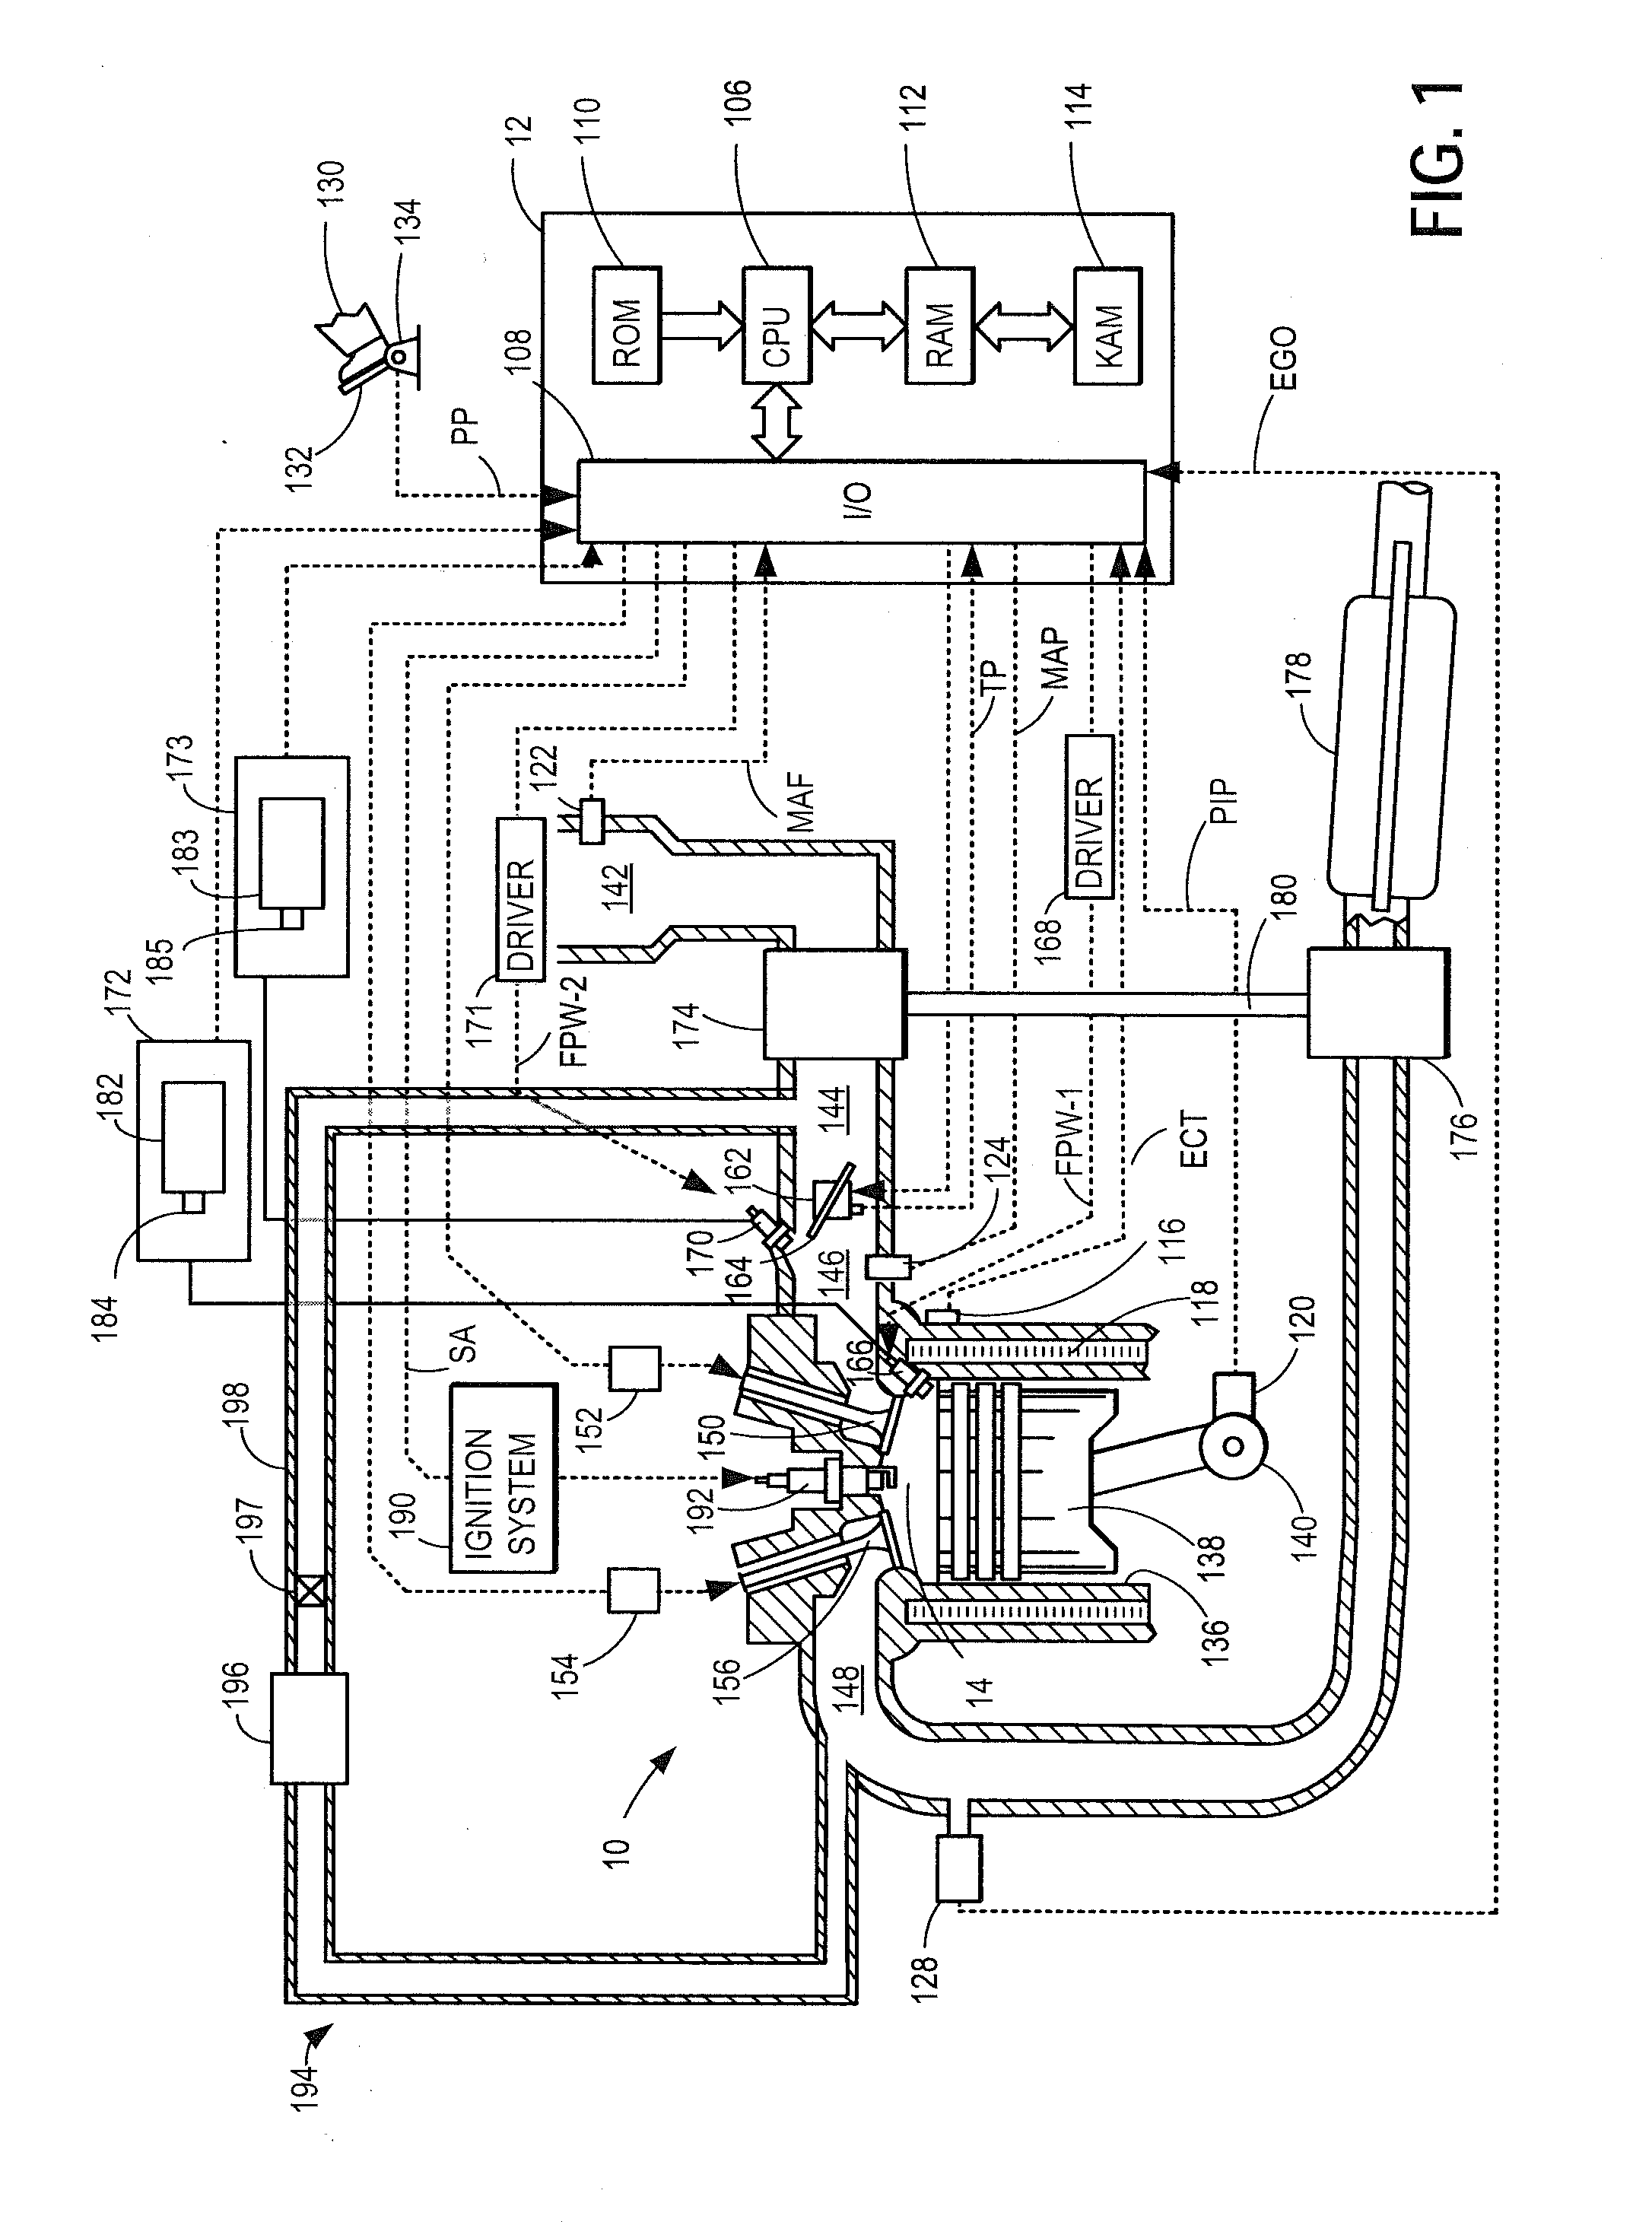 Systems and methods for injecting gaseous fuel during an exhaust stroke to reduce turbo lag